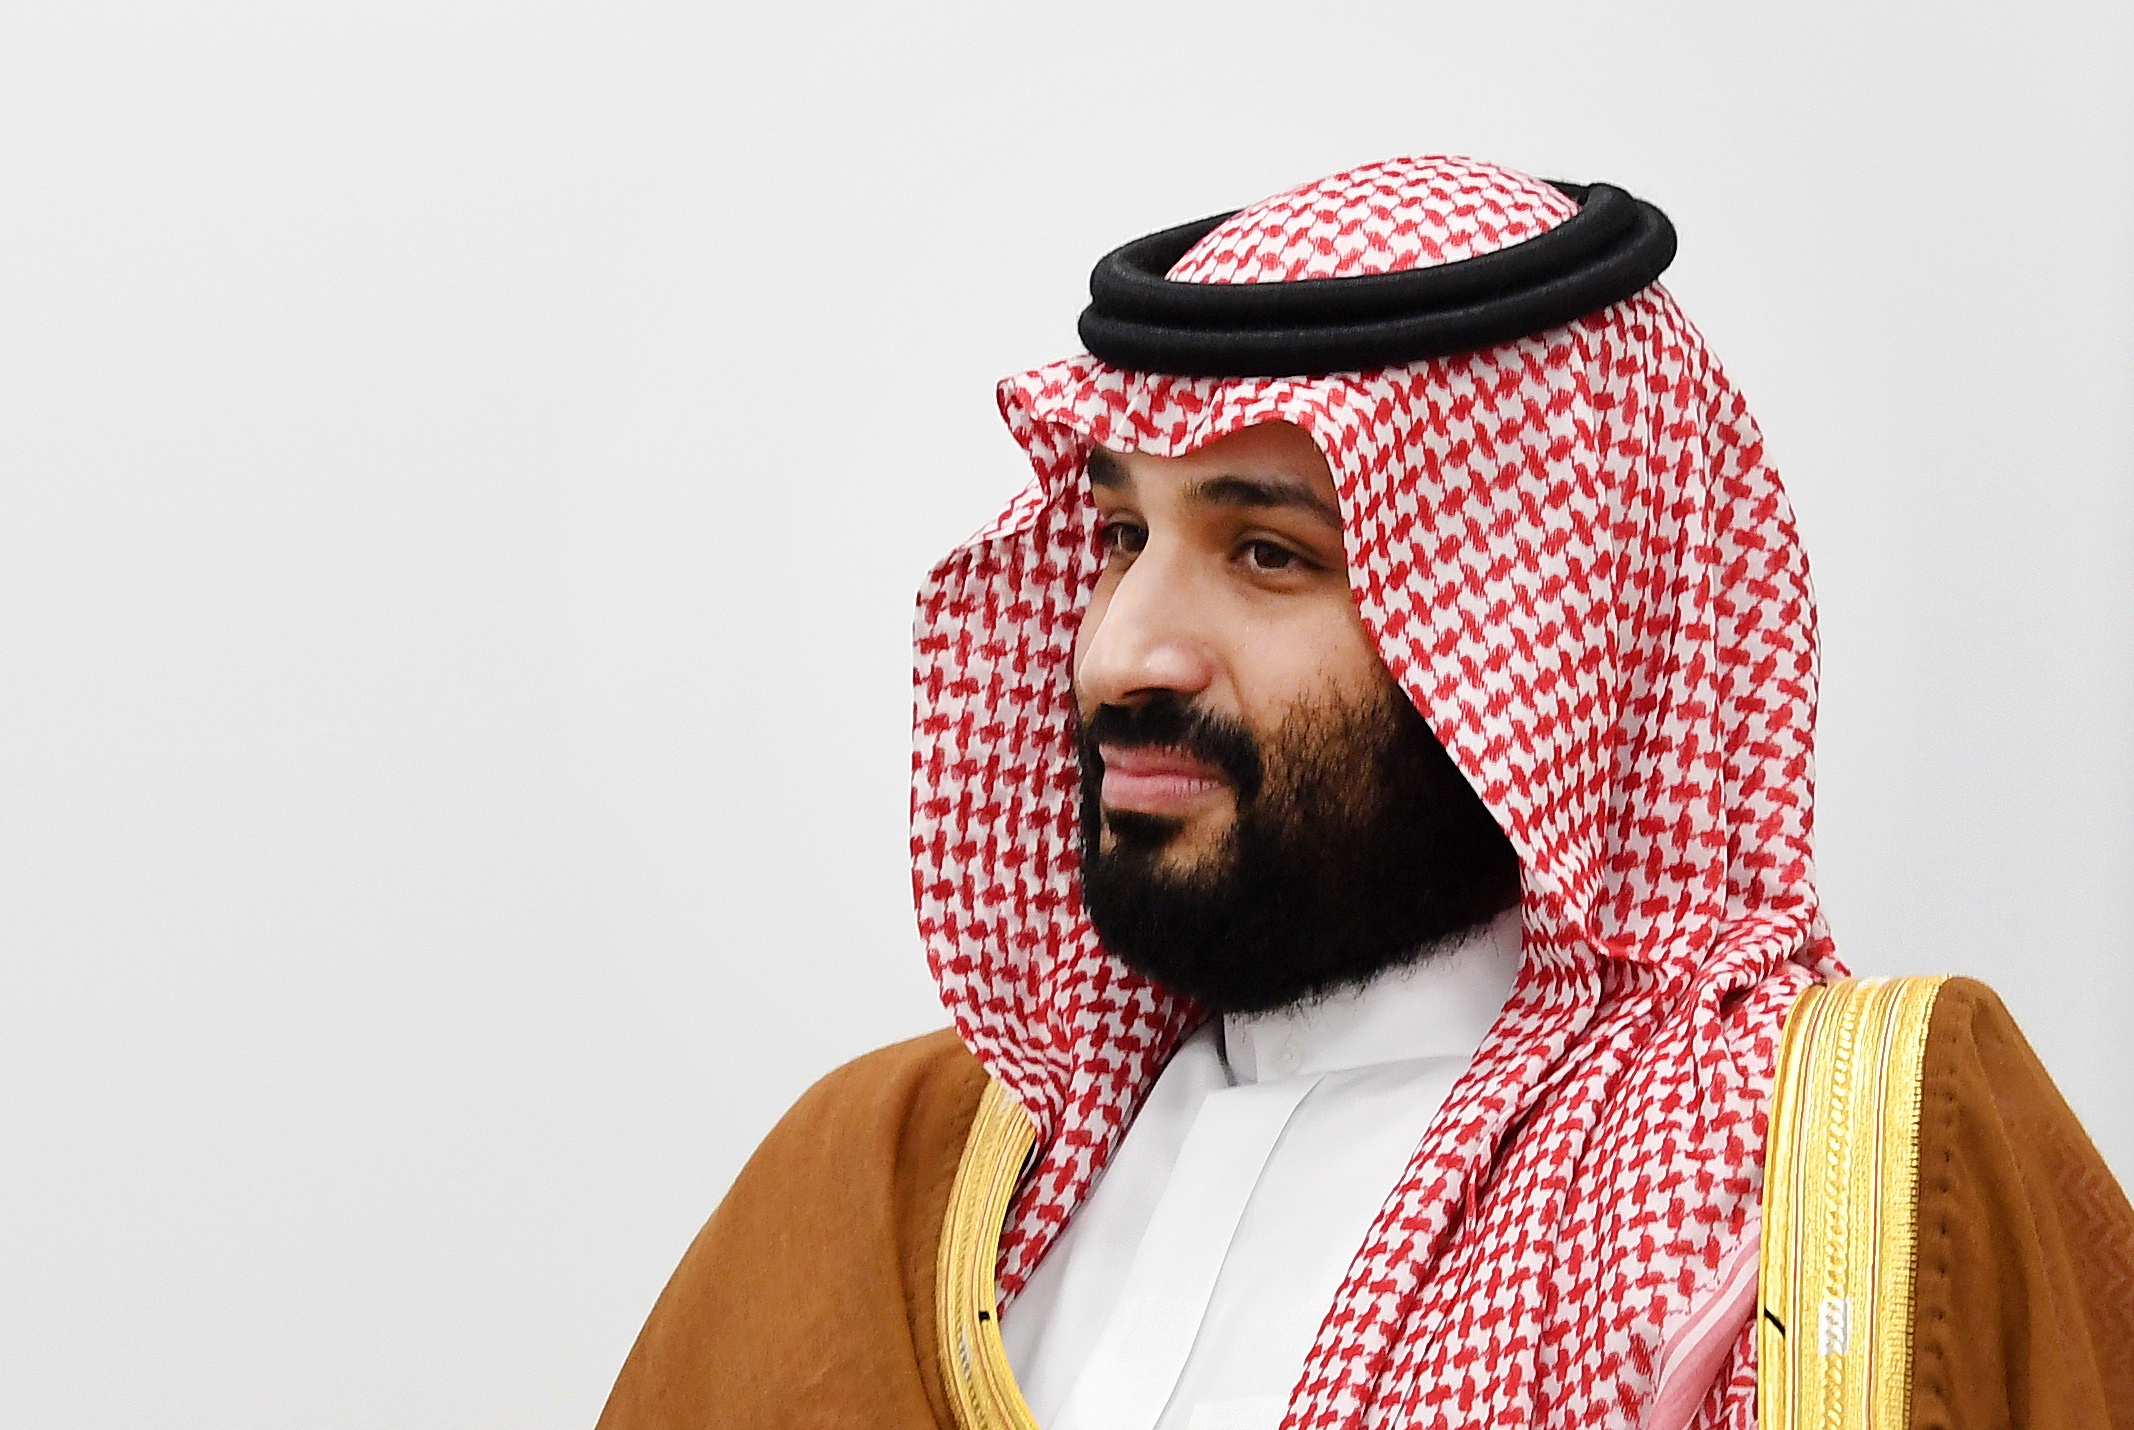 epa07881697 (FILE) - British Prime Minister Theresa May (not pictured) and Crown Prince Mohammed bin Salman of Saudi Arabia hold talks during the second day of the G20 summit in Osaka, Japan, 29 June 2019 (issued 30 September 2019). In an exclusive interview with US television network CBS on 29 September 2019, Mohammed bin Salman warned the international community of the threat posed by Iran to the global oil trade. Iran has been accused by Saudi Arabia and the US of attacking two oilfields in eastern Saudi Arabia last month, allegations that Tehran have denied.  EPA/ANDY RAIN / POOL